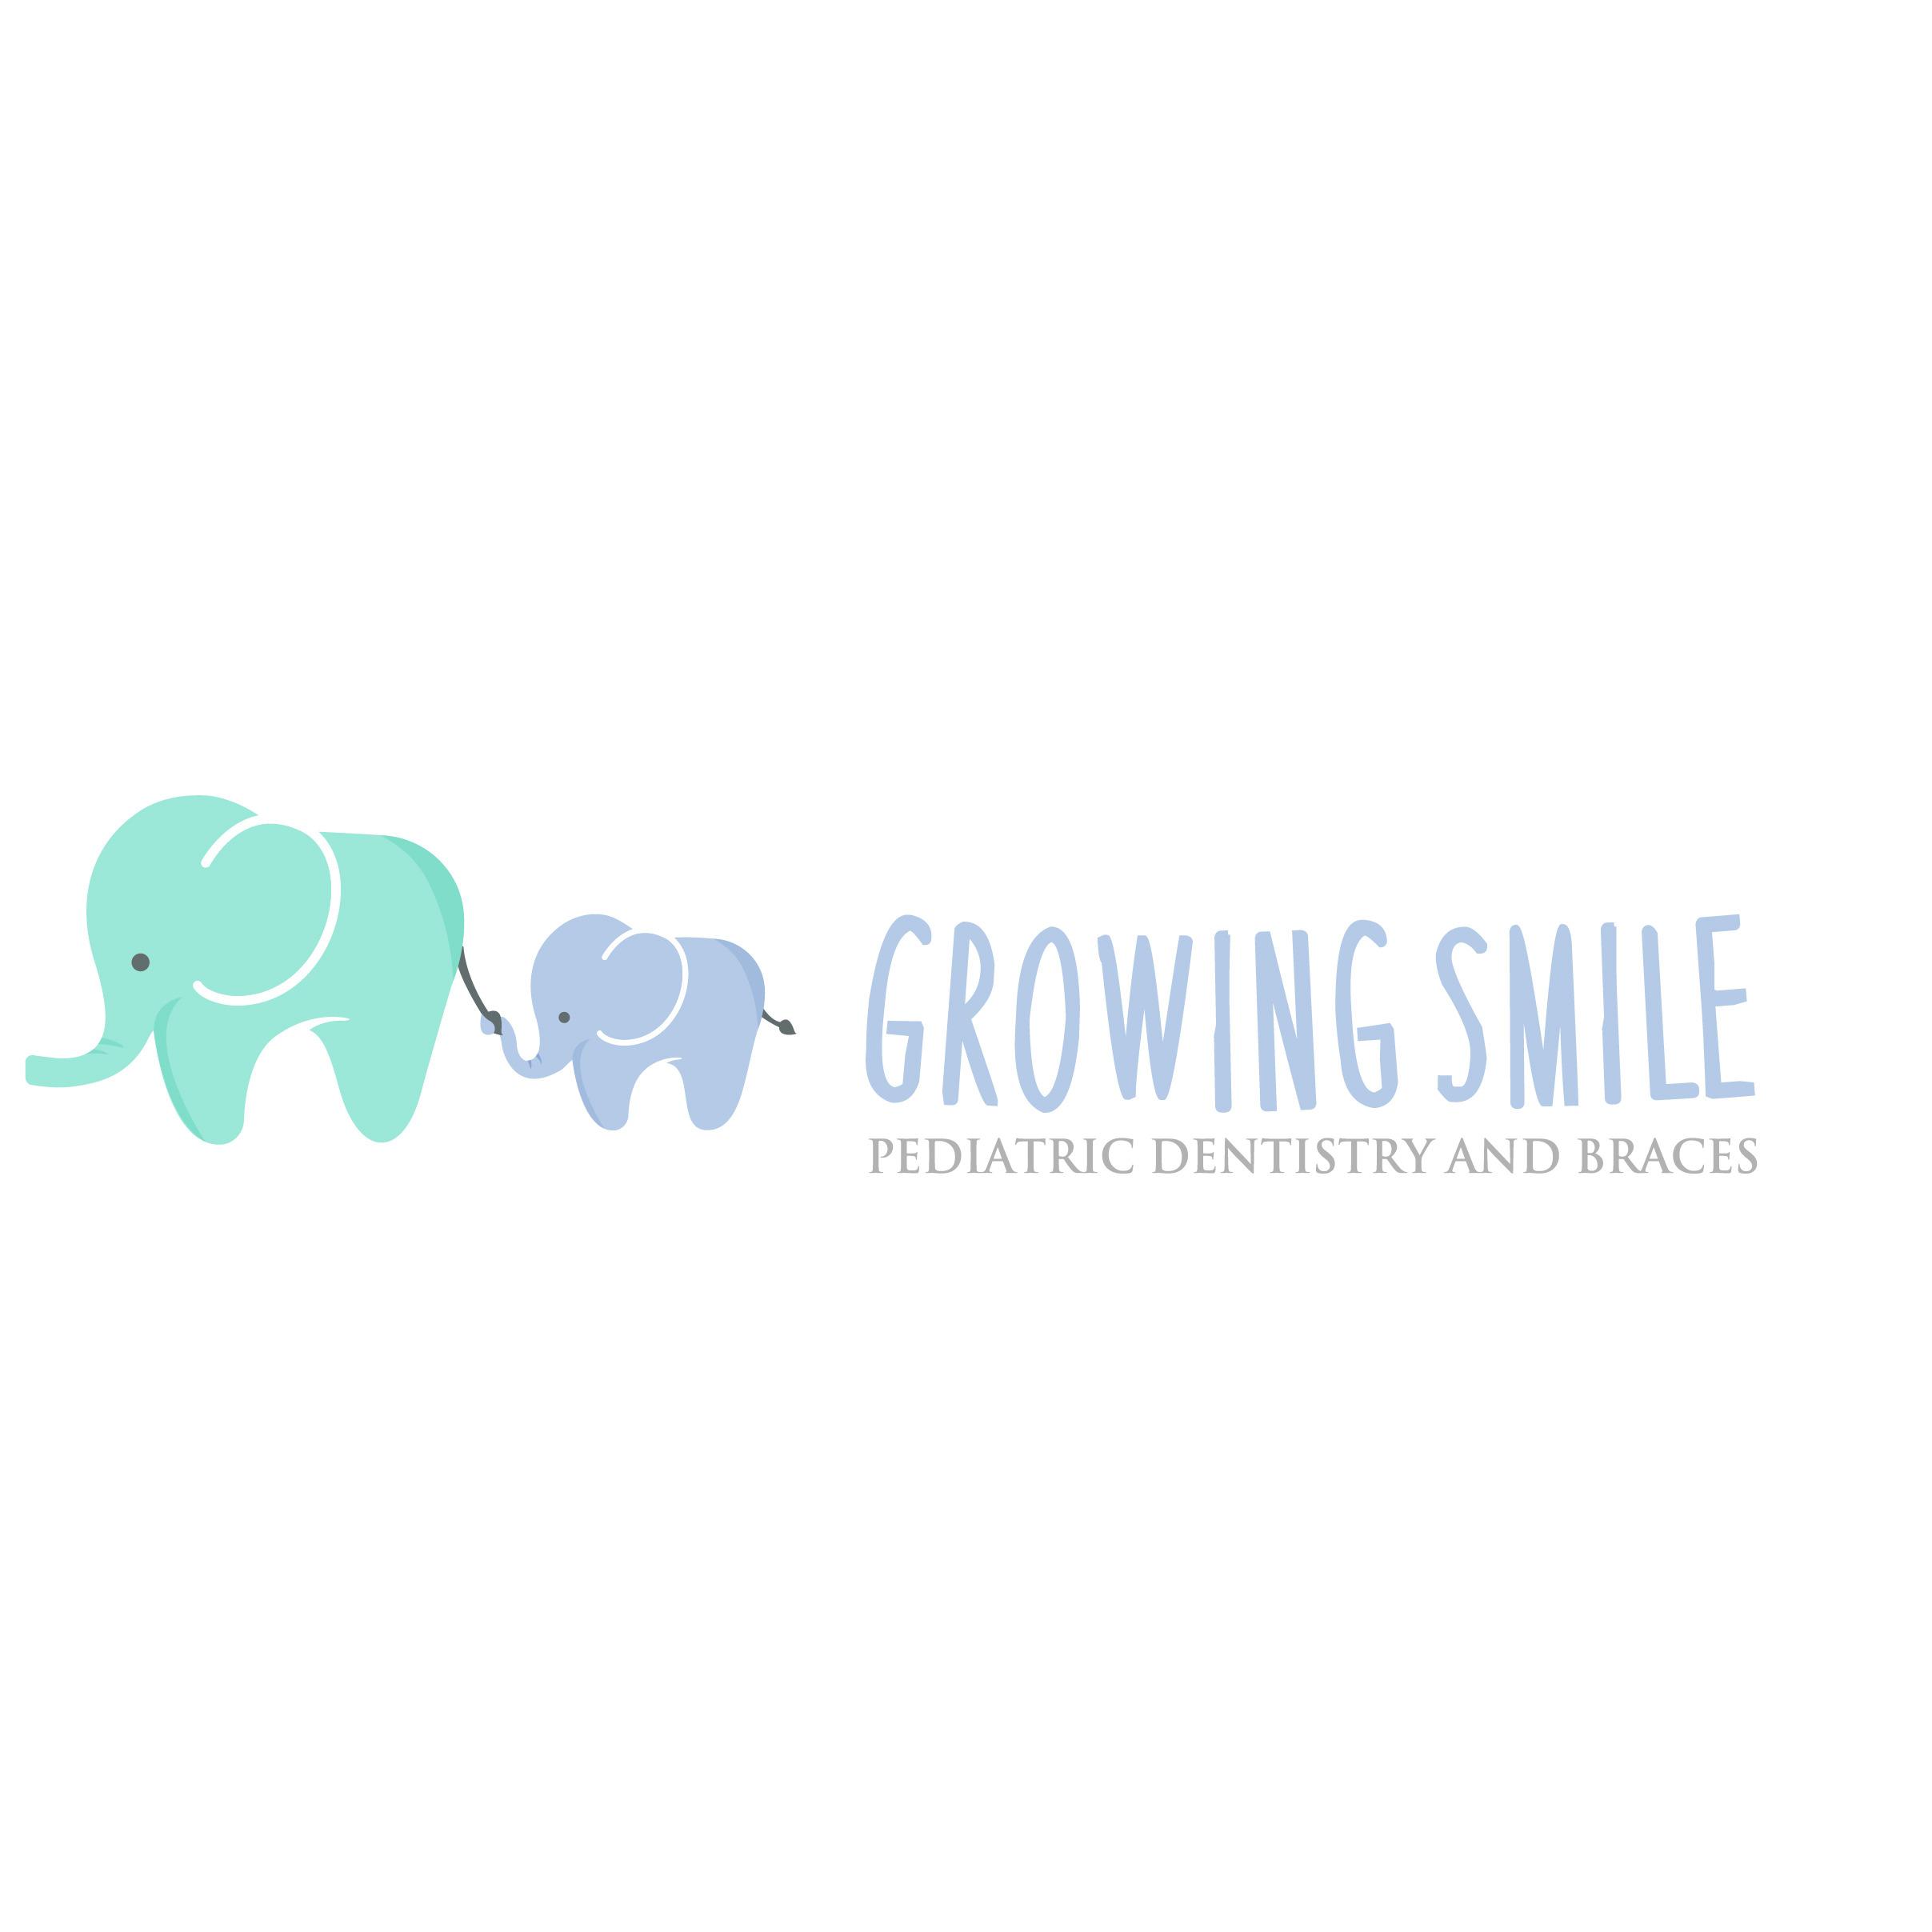 Growing Smile Pediatric Dentistry and Braces